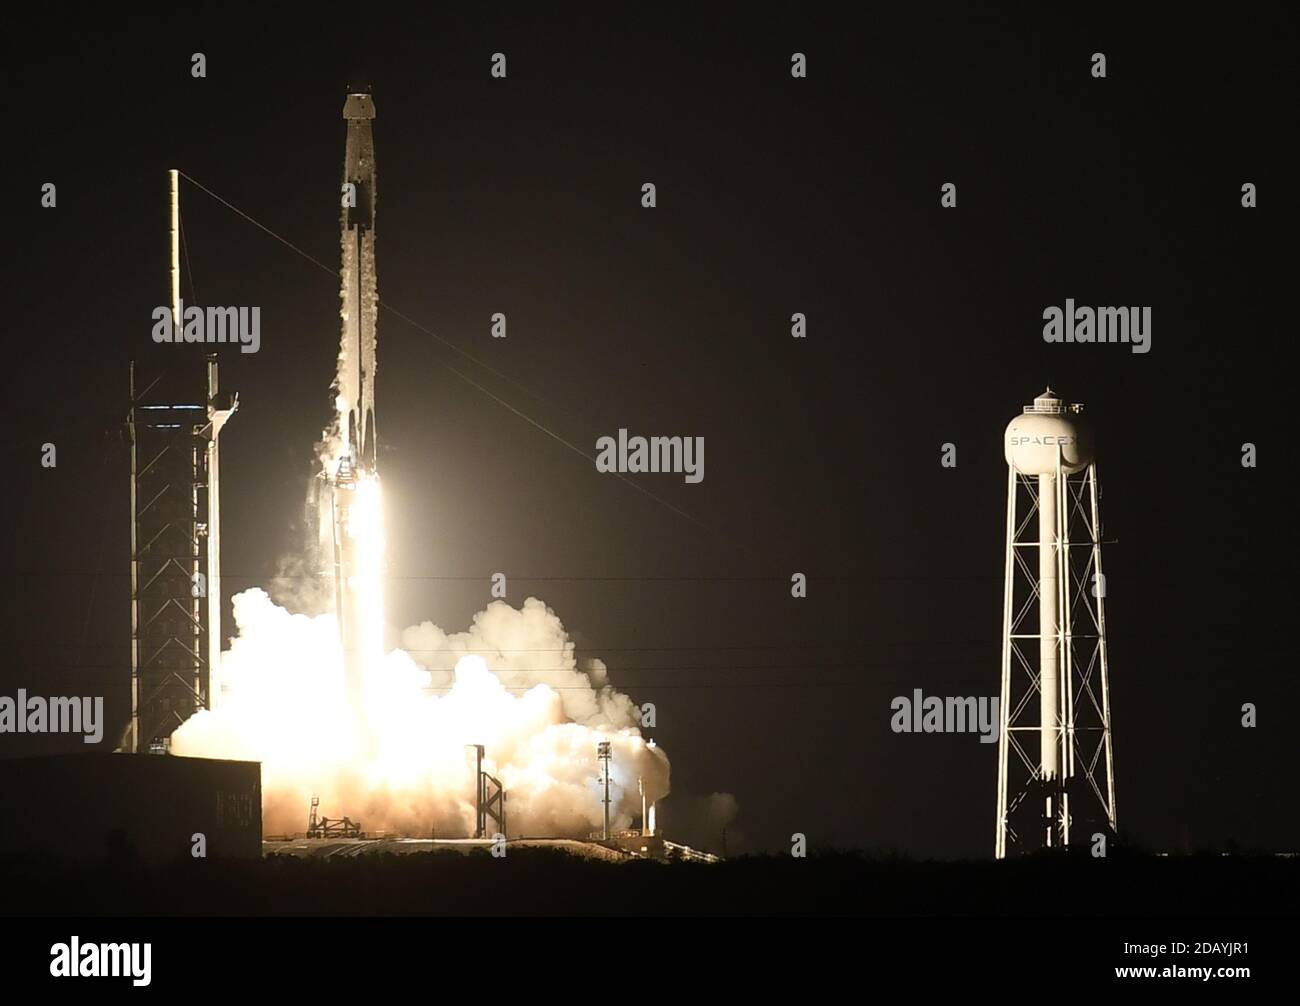 November 15, 2020 - Cape Canaveral, Florida, United States - A SpaceX Falcon 9 rocket carrying the Crew Dragon spacecraft launches from pad 39A at the Kennedy Space Center on November 15, 2020 in Cape Canaveral, Florida. The Crew-1 mission is sending a crew of four astronauts to the International Space Station. (Paul Hennessy/Alamy) Stock Photo